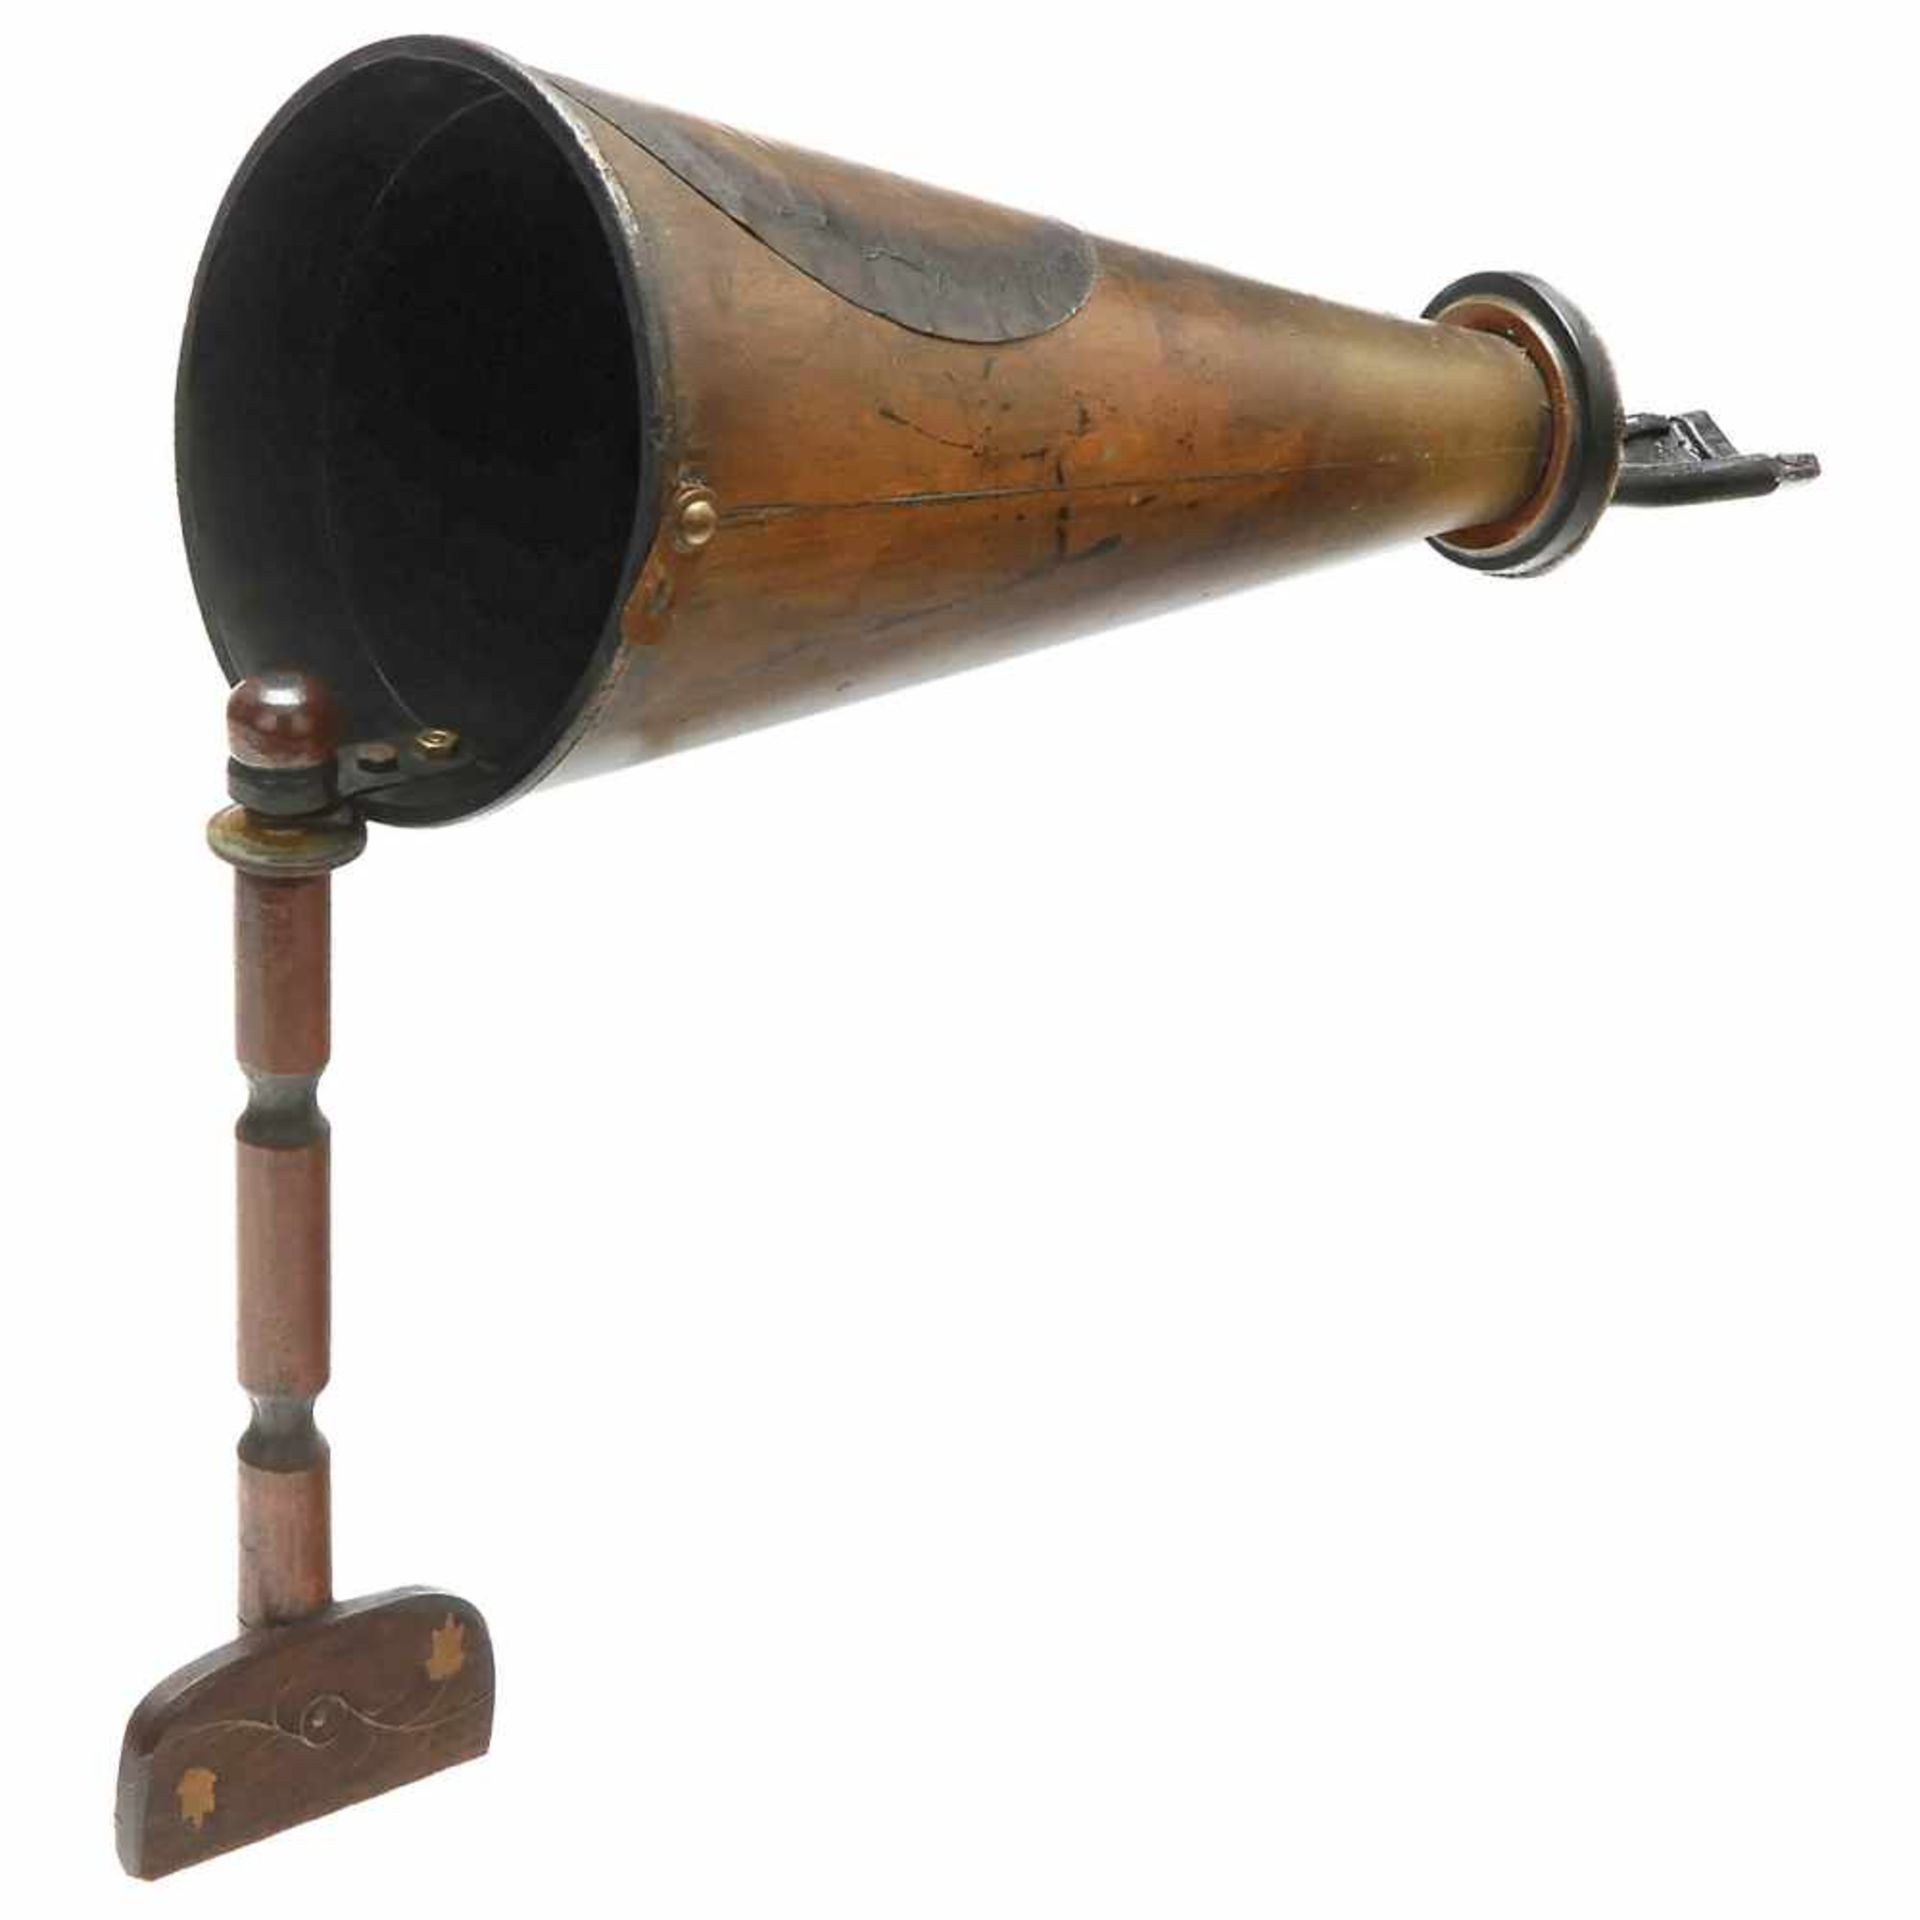 Pet-O-Fone Portable Gramophone, c. 1925A very curious construction, with additional horn. With an - Bild 3 aus 3